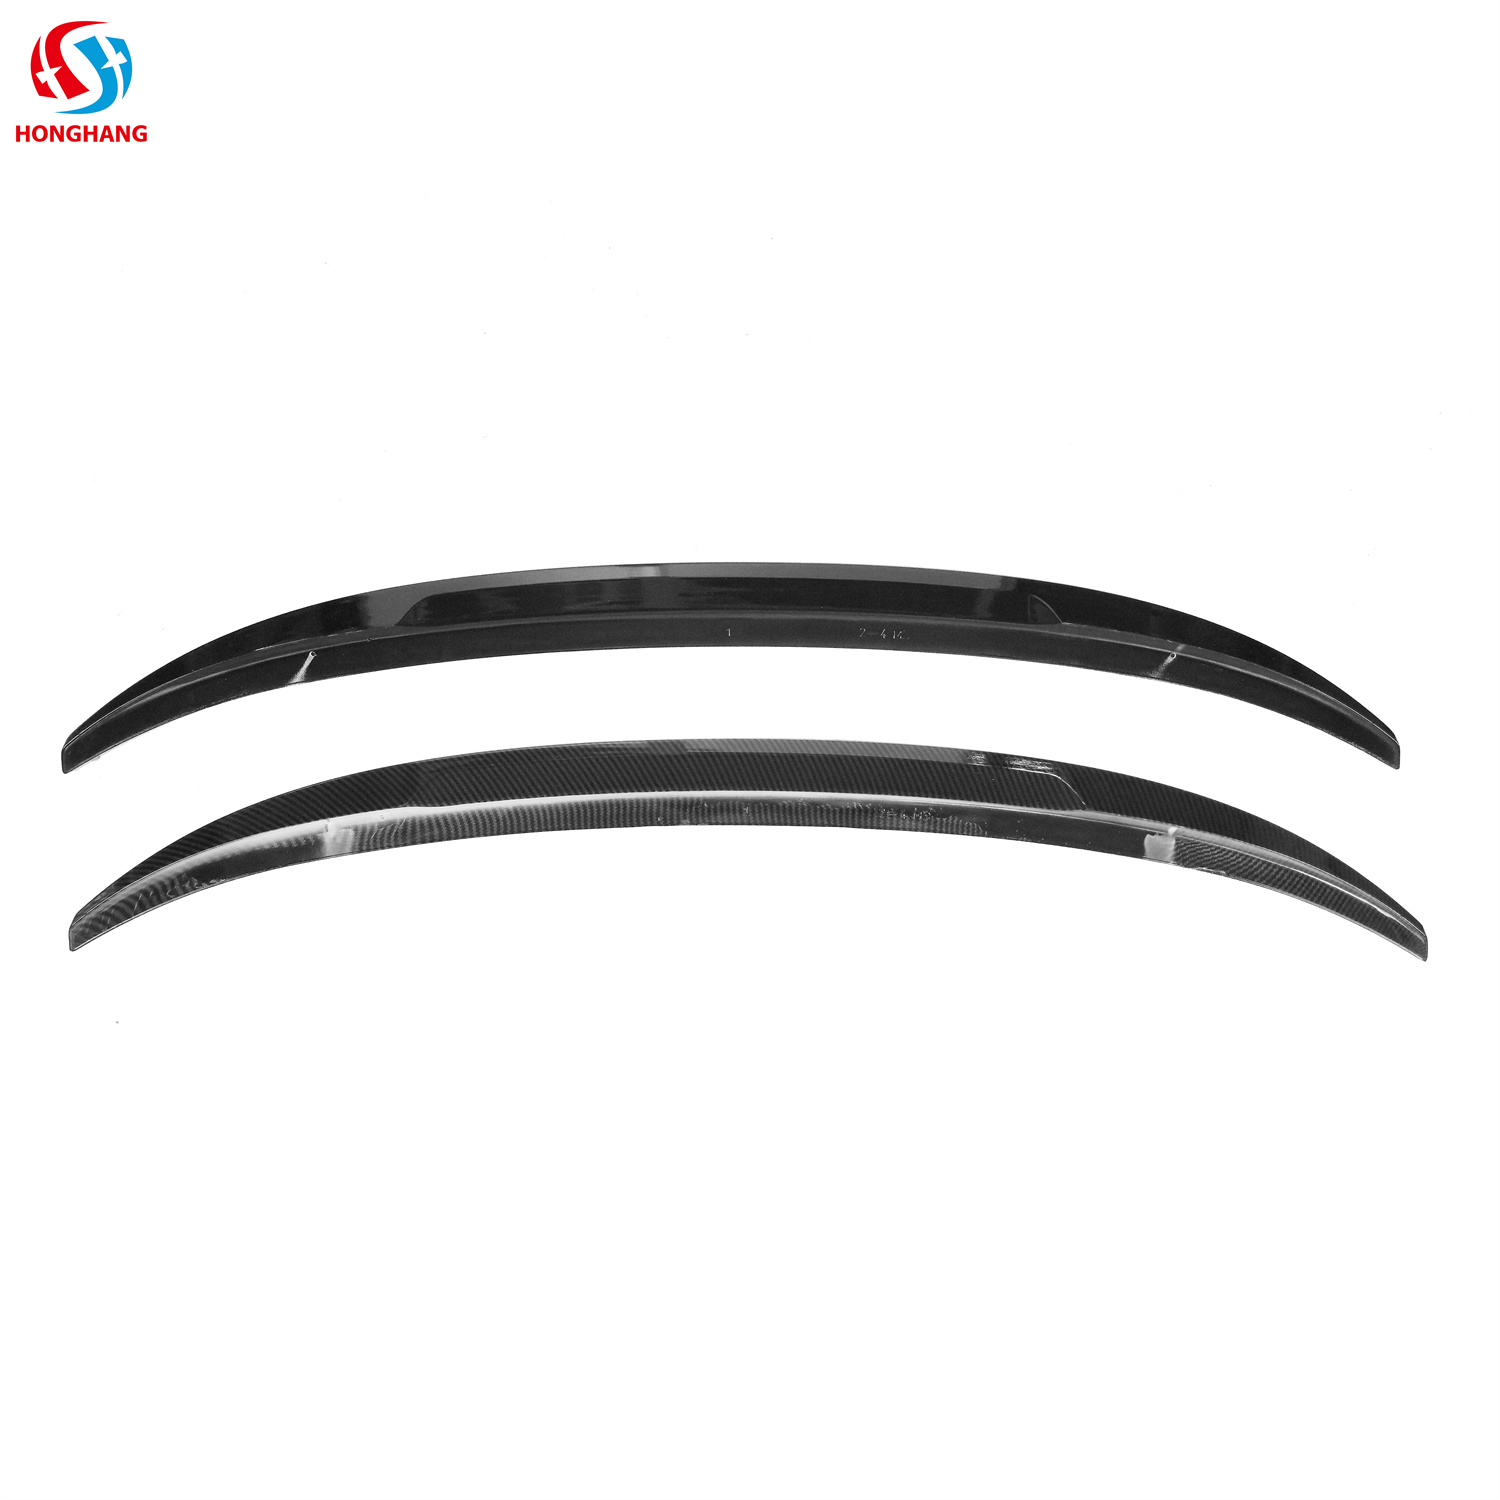 M4 Style Rear Spoiler for Bmw 4 Series F36